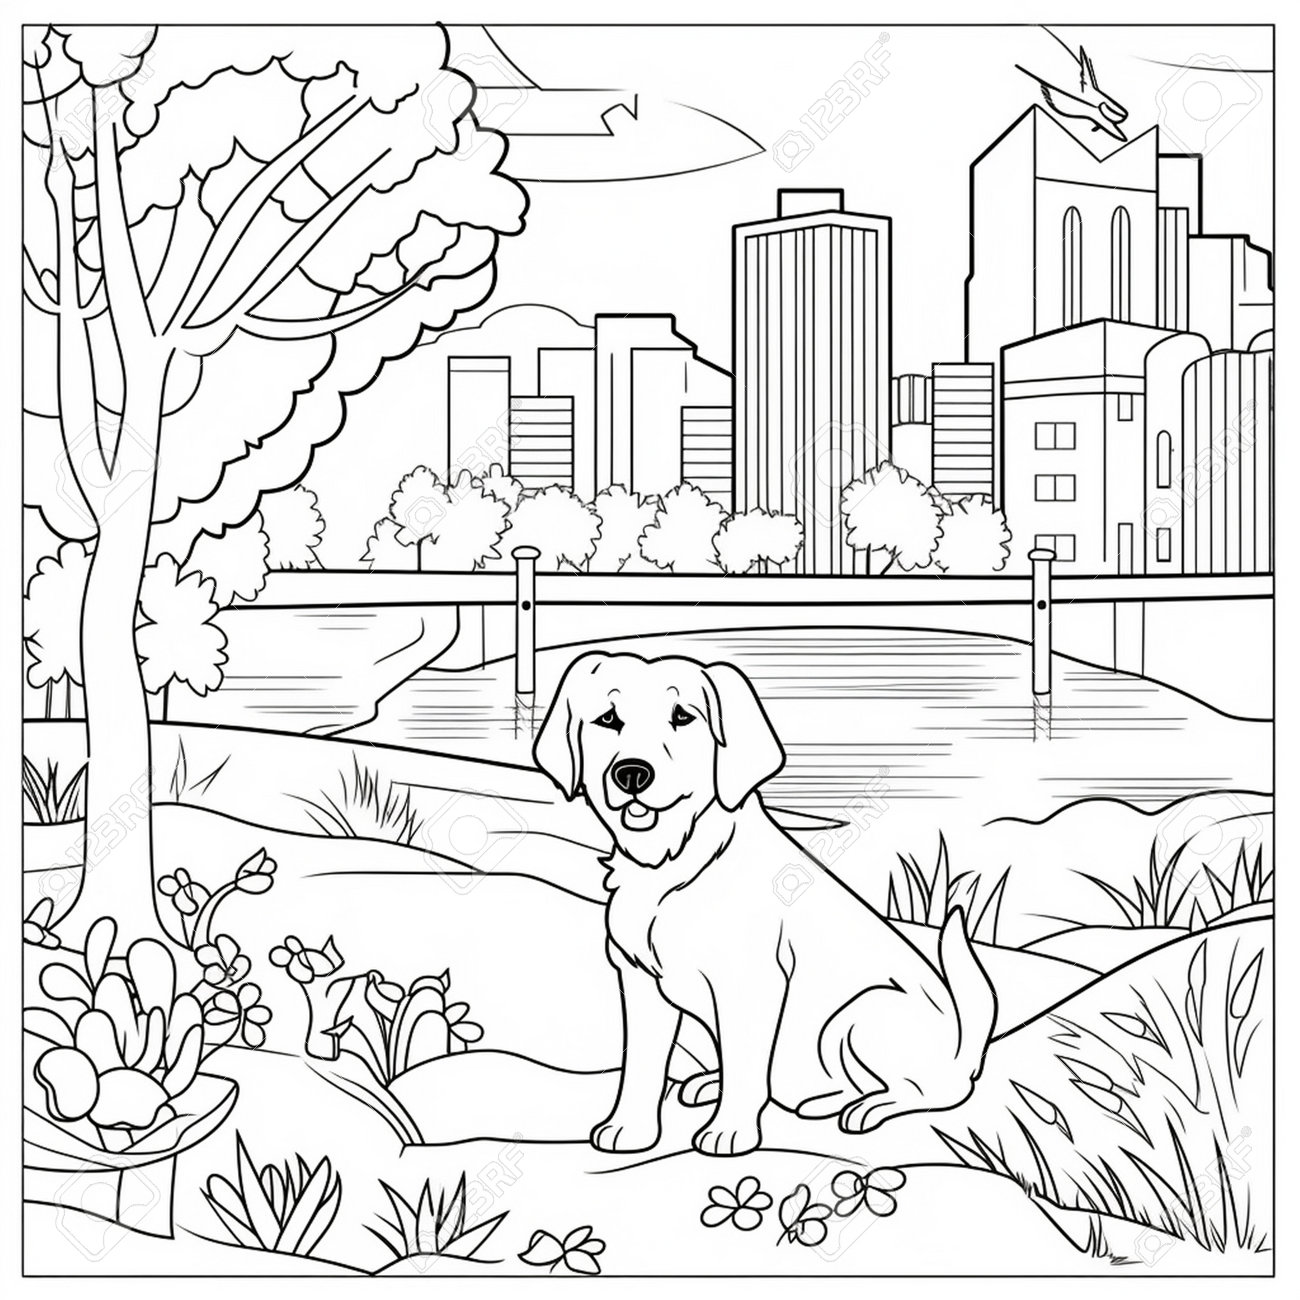 Coloring page outline of a labrador retriever in the park coloring book for adults and kids small kids coloring page drawing stock photo picture and royalty free image image